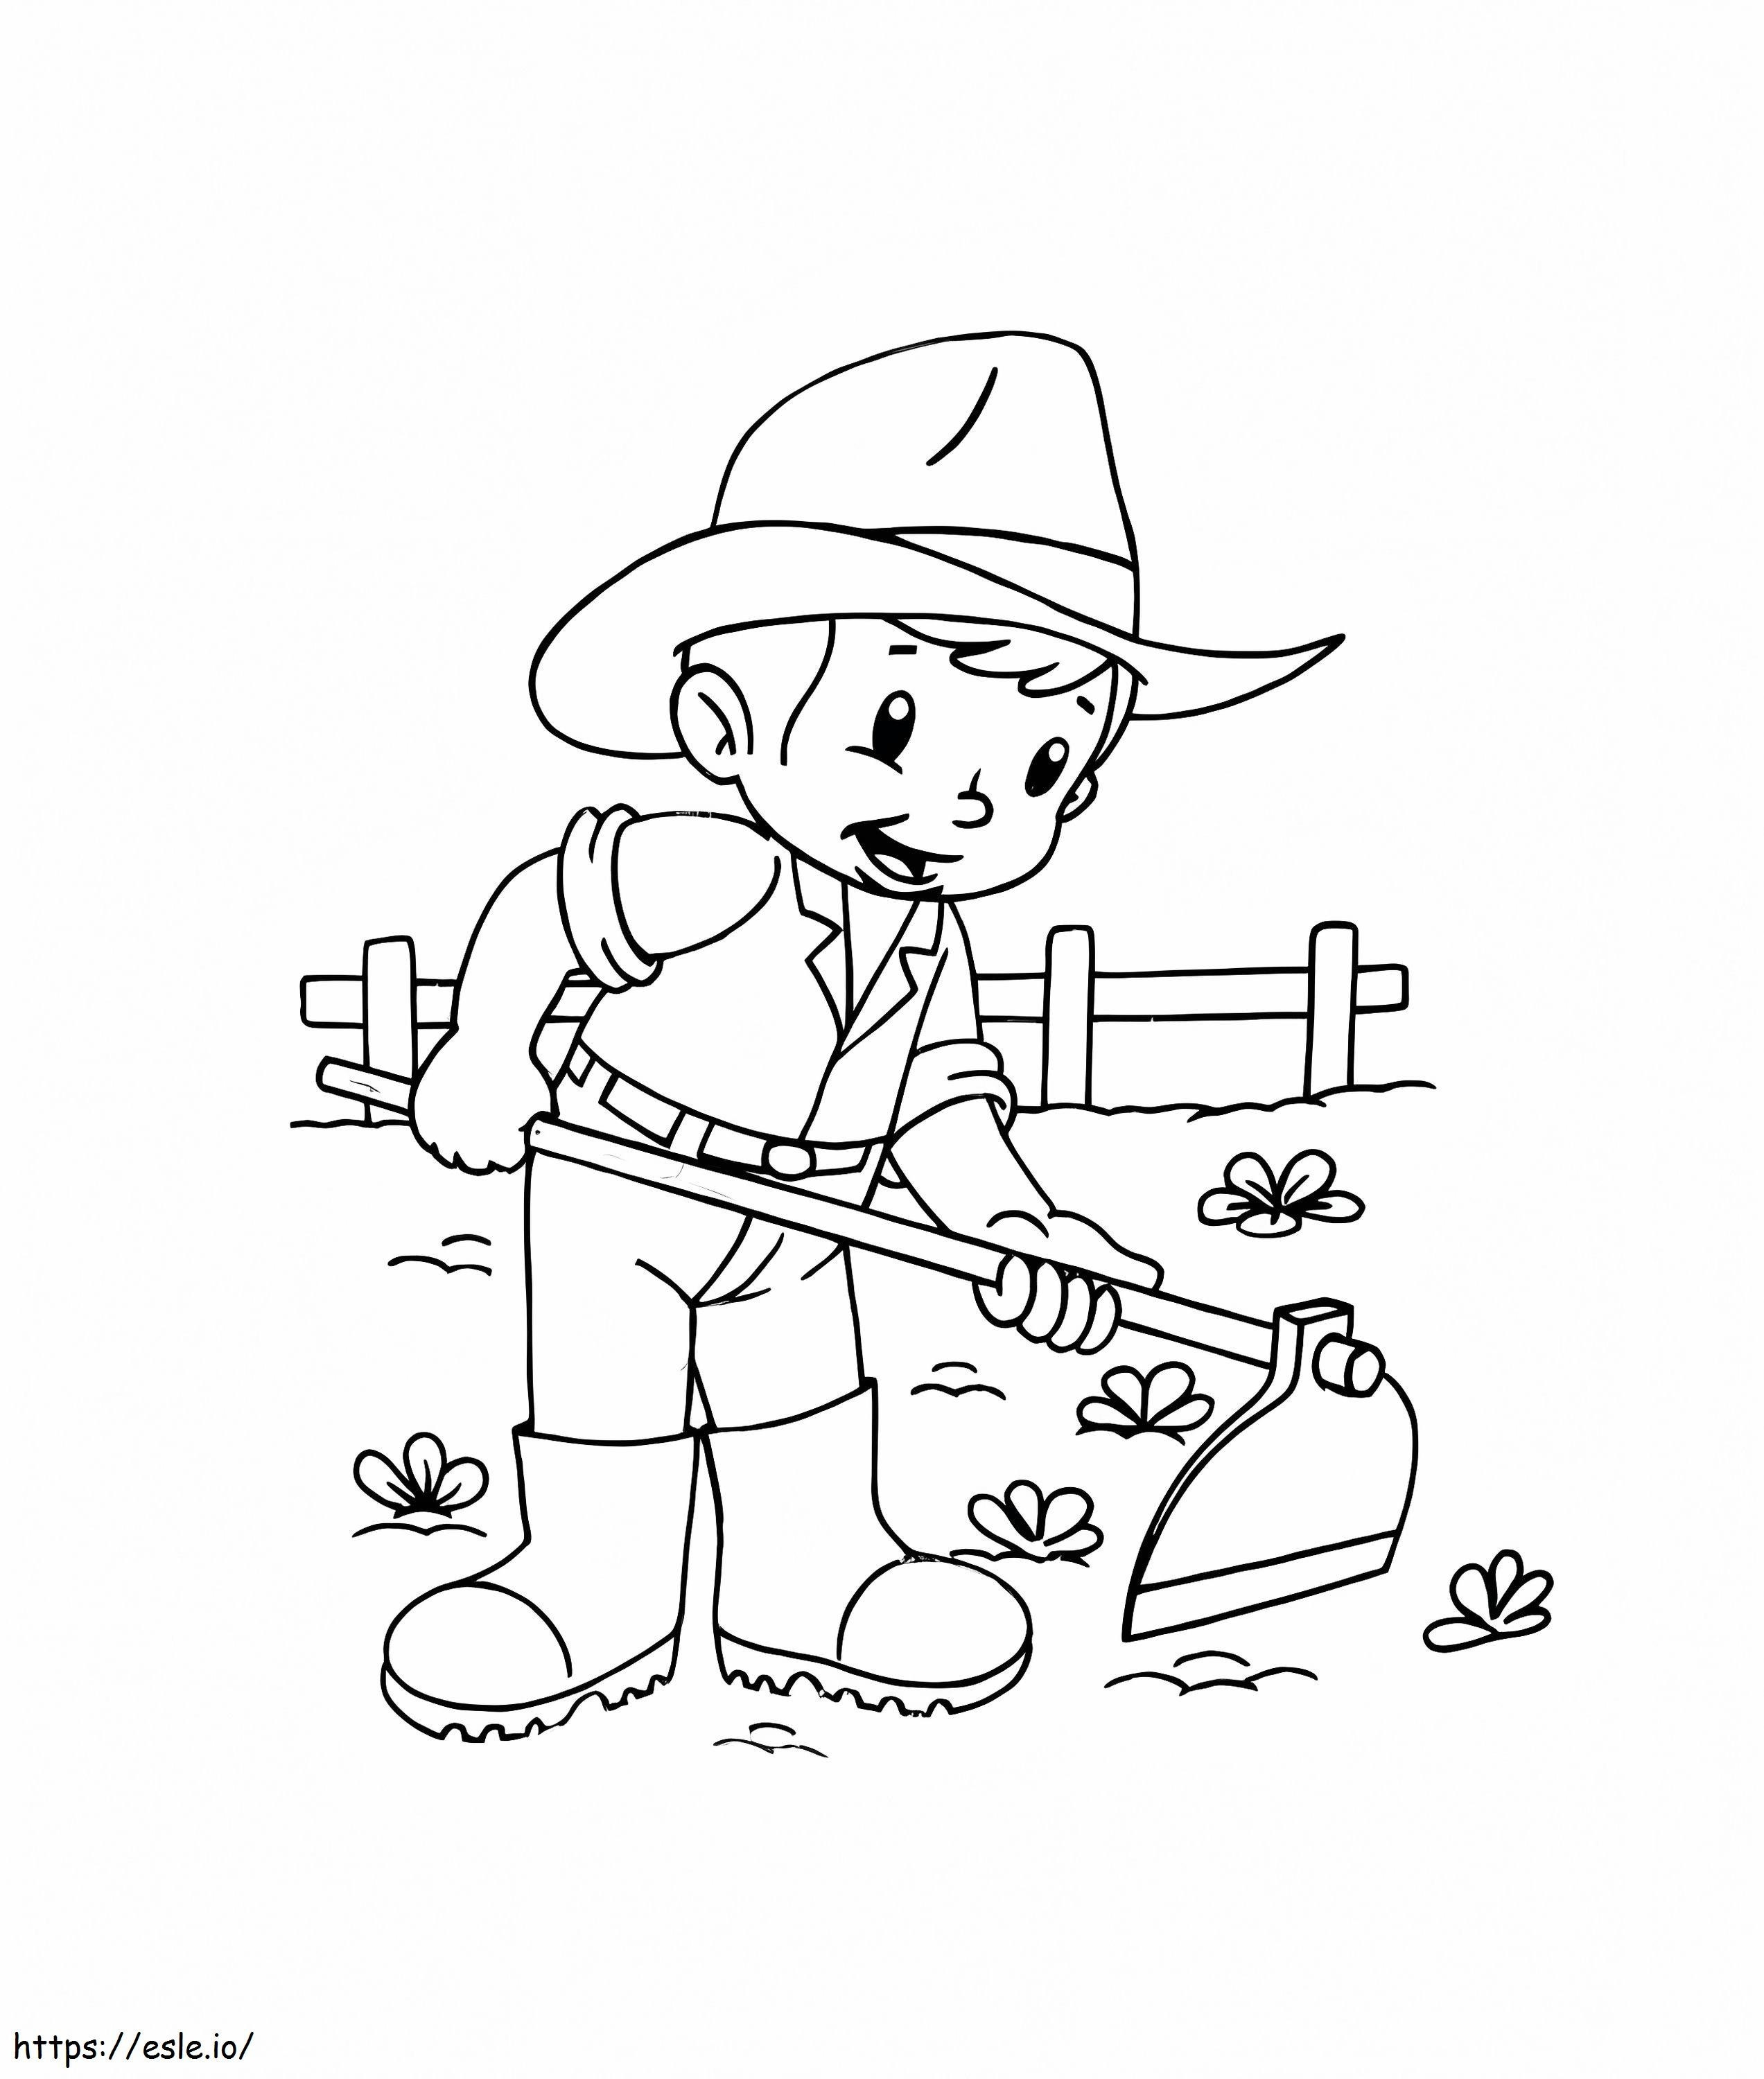 Farmer 2 coloring page